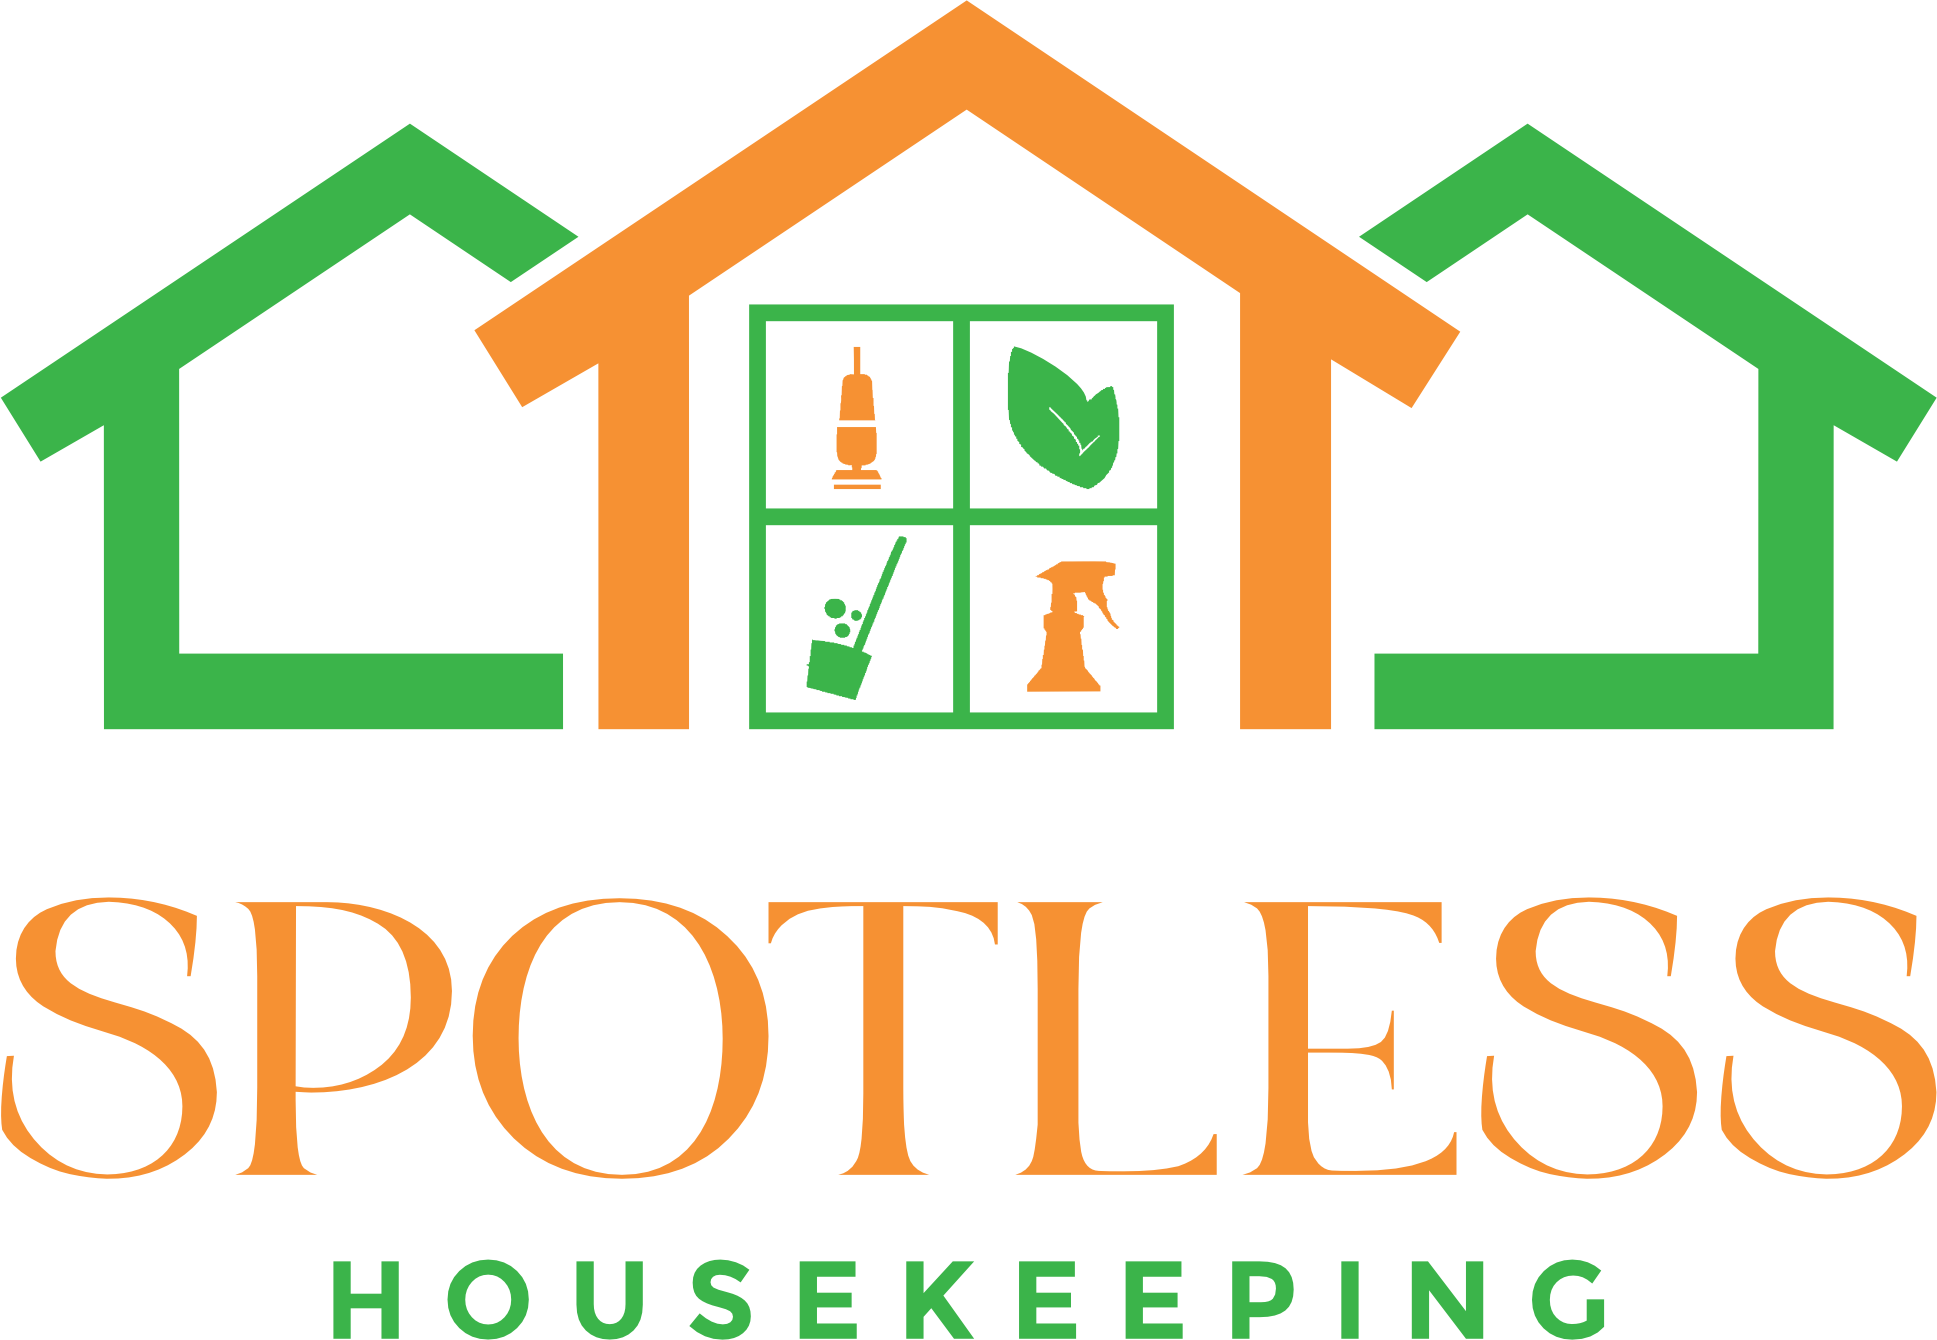 Spotless Housekeeping Services